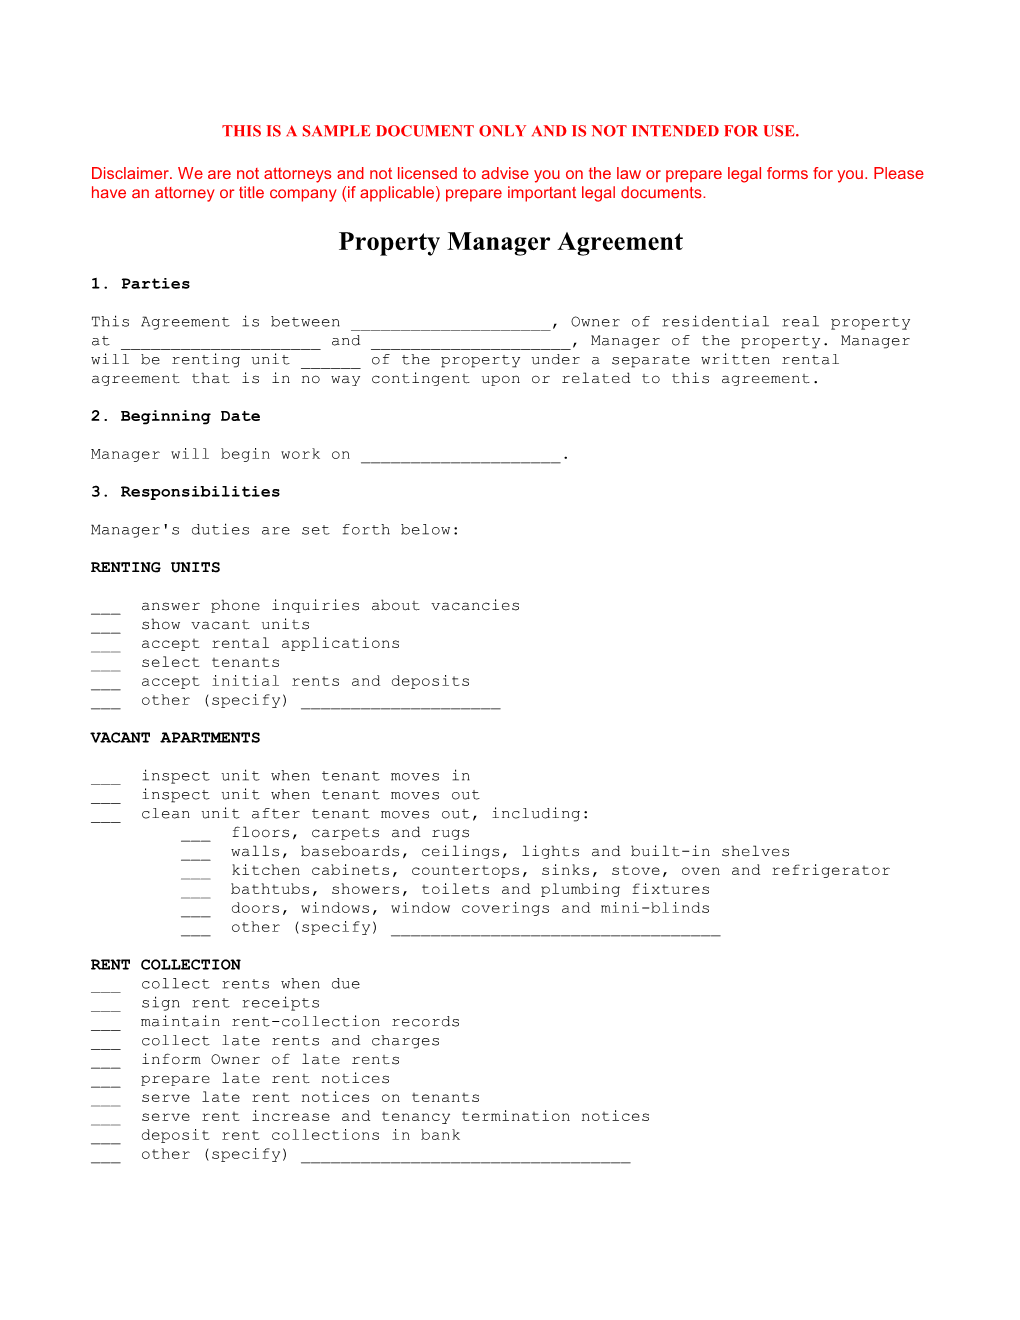 Property Manager Agreement